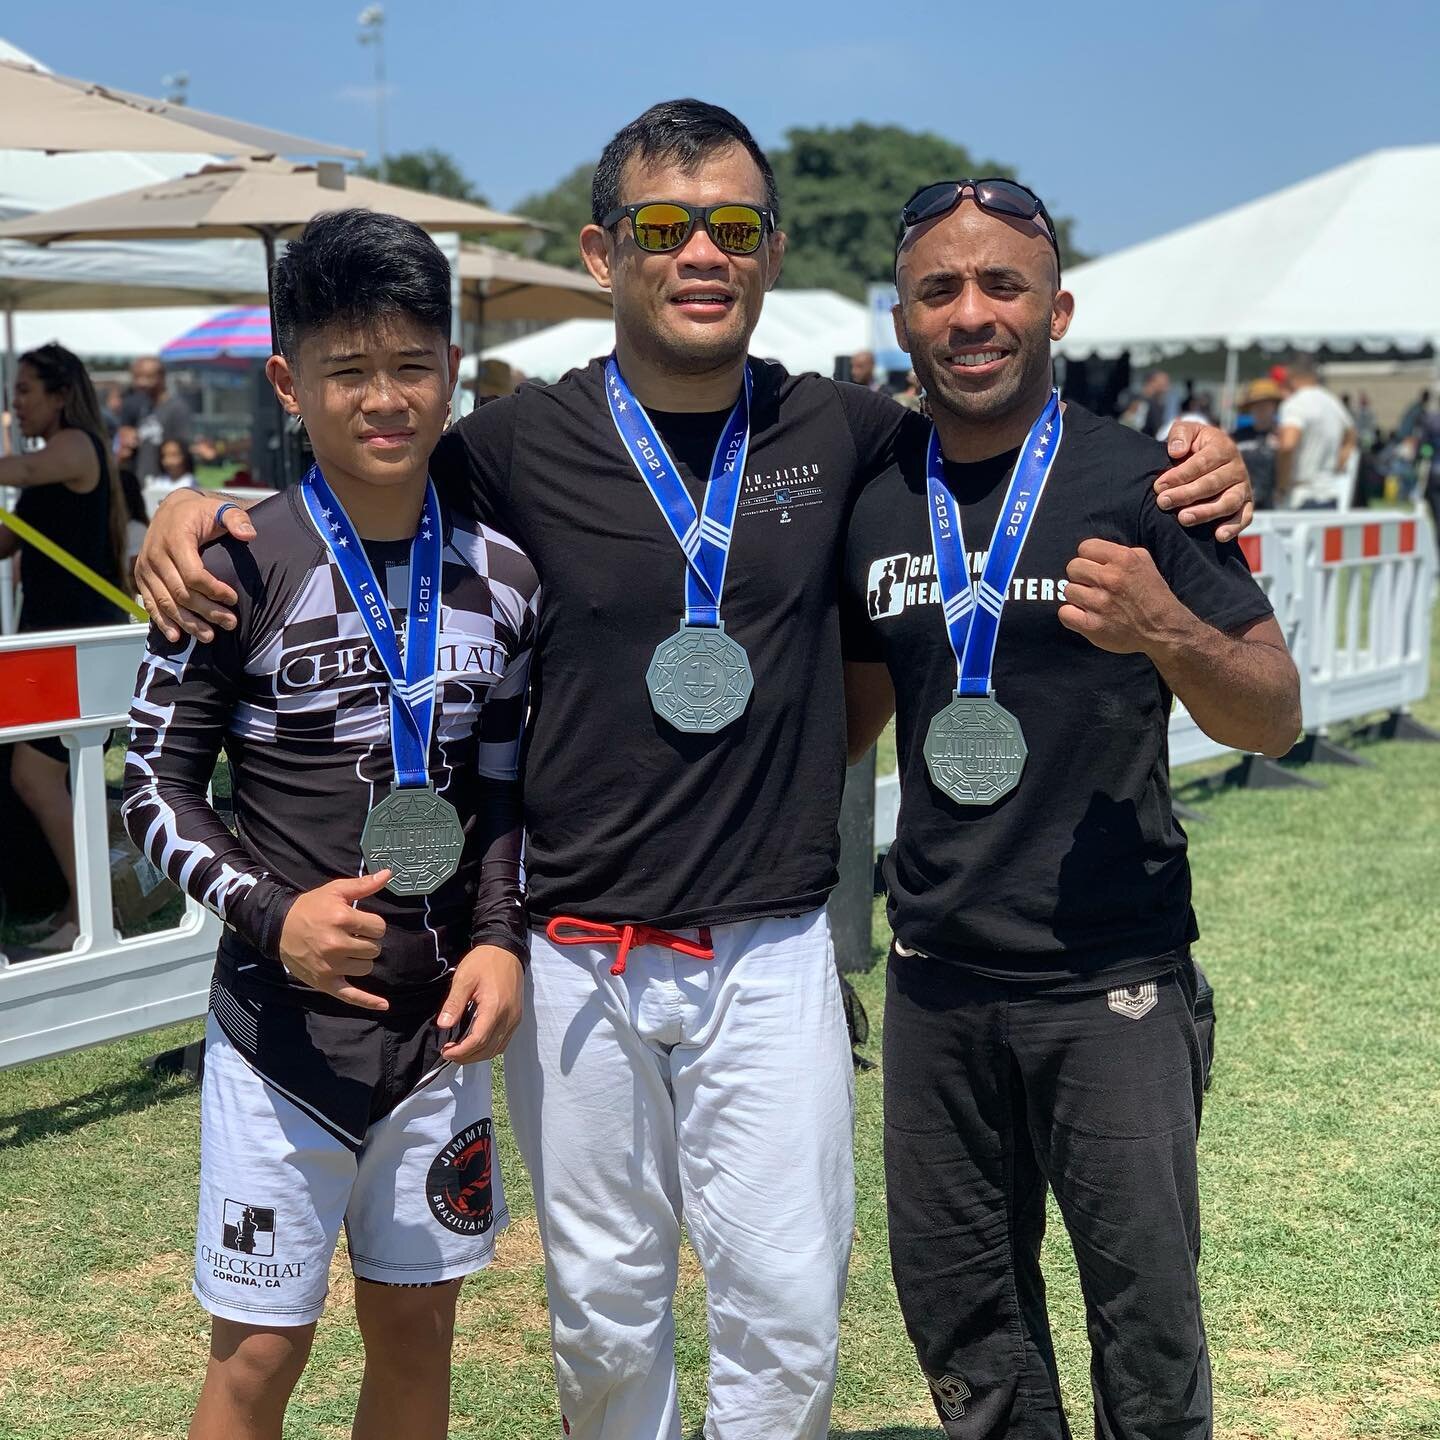 Great day today! With silvers for Shannon, Jake and I! Big congratulations to Brianne @bgriego1029 for Gold!! So proud of this crew! #checkmatbjj #checkmatcorona #jimmytatbjj #syr #shoyoroll